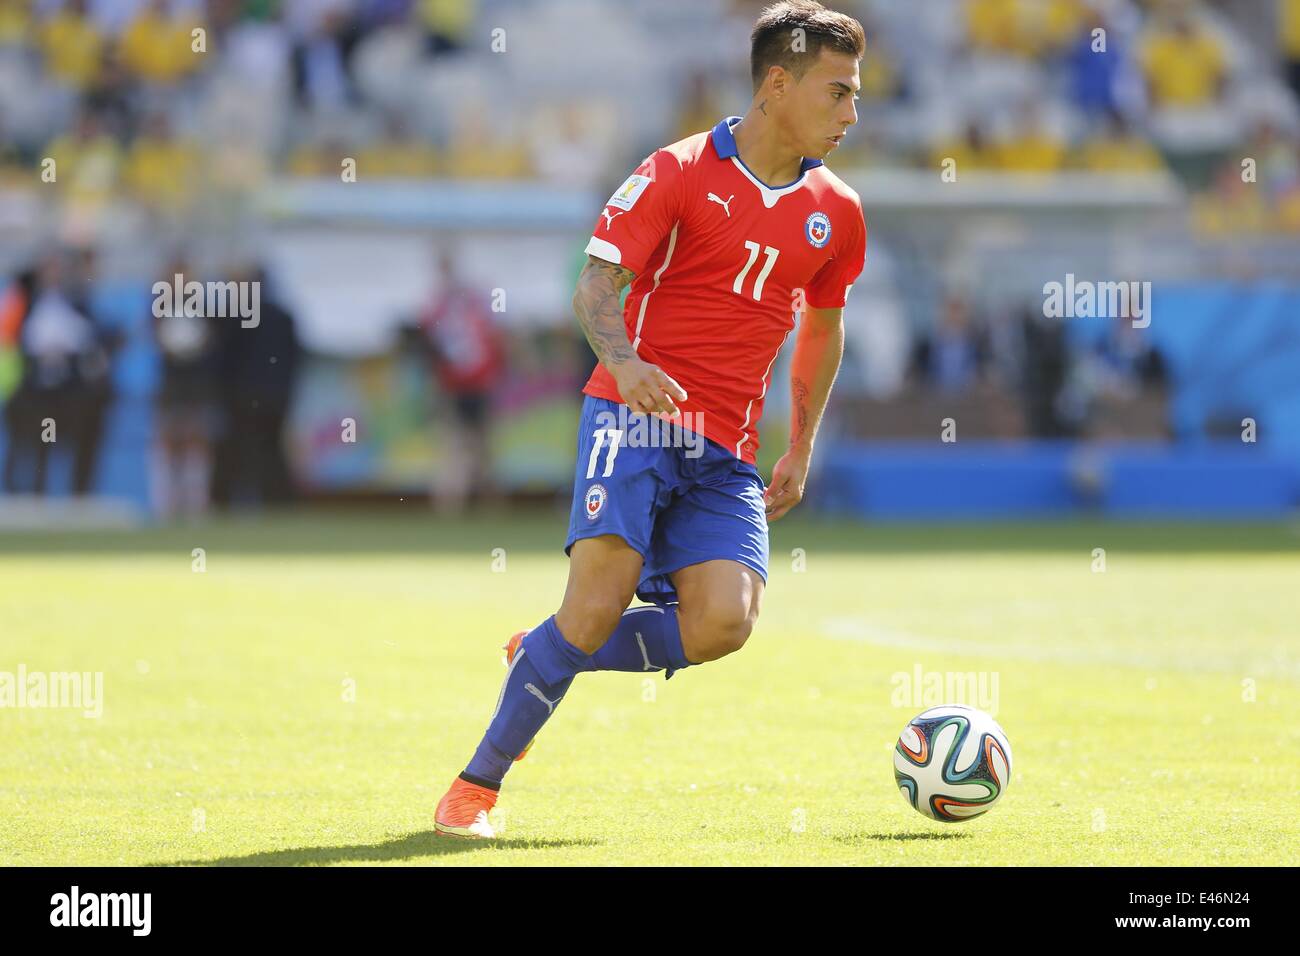 Belo Horizonte, Brazil. 28th June, 2014. Eduardo Vargas (CHI) Football/Soccer : FIFA World Cup Brazil 2014 round of 16 match between Brazil and Chile at the Mineirao Stadium in Belo Horizonte, Brazil . © AFLO/Alamy Live News Stock Photo